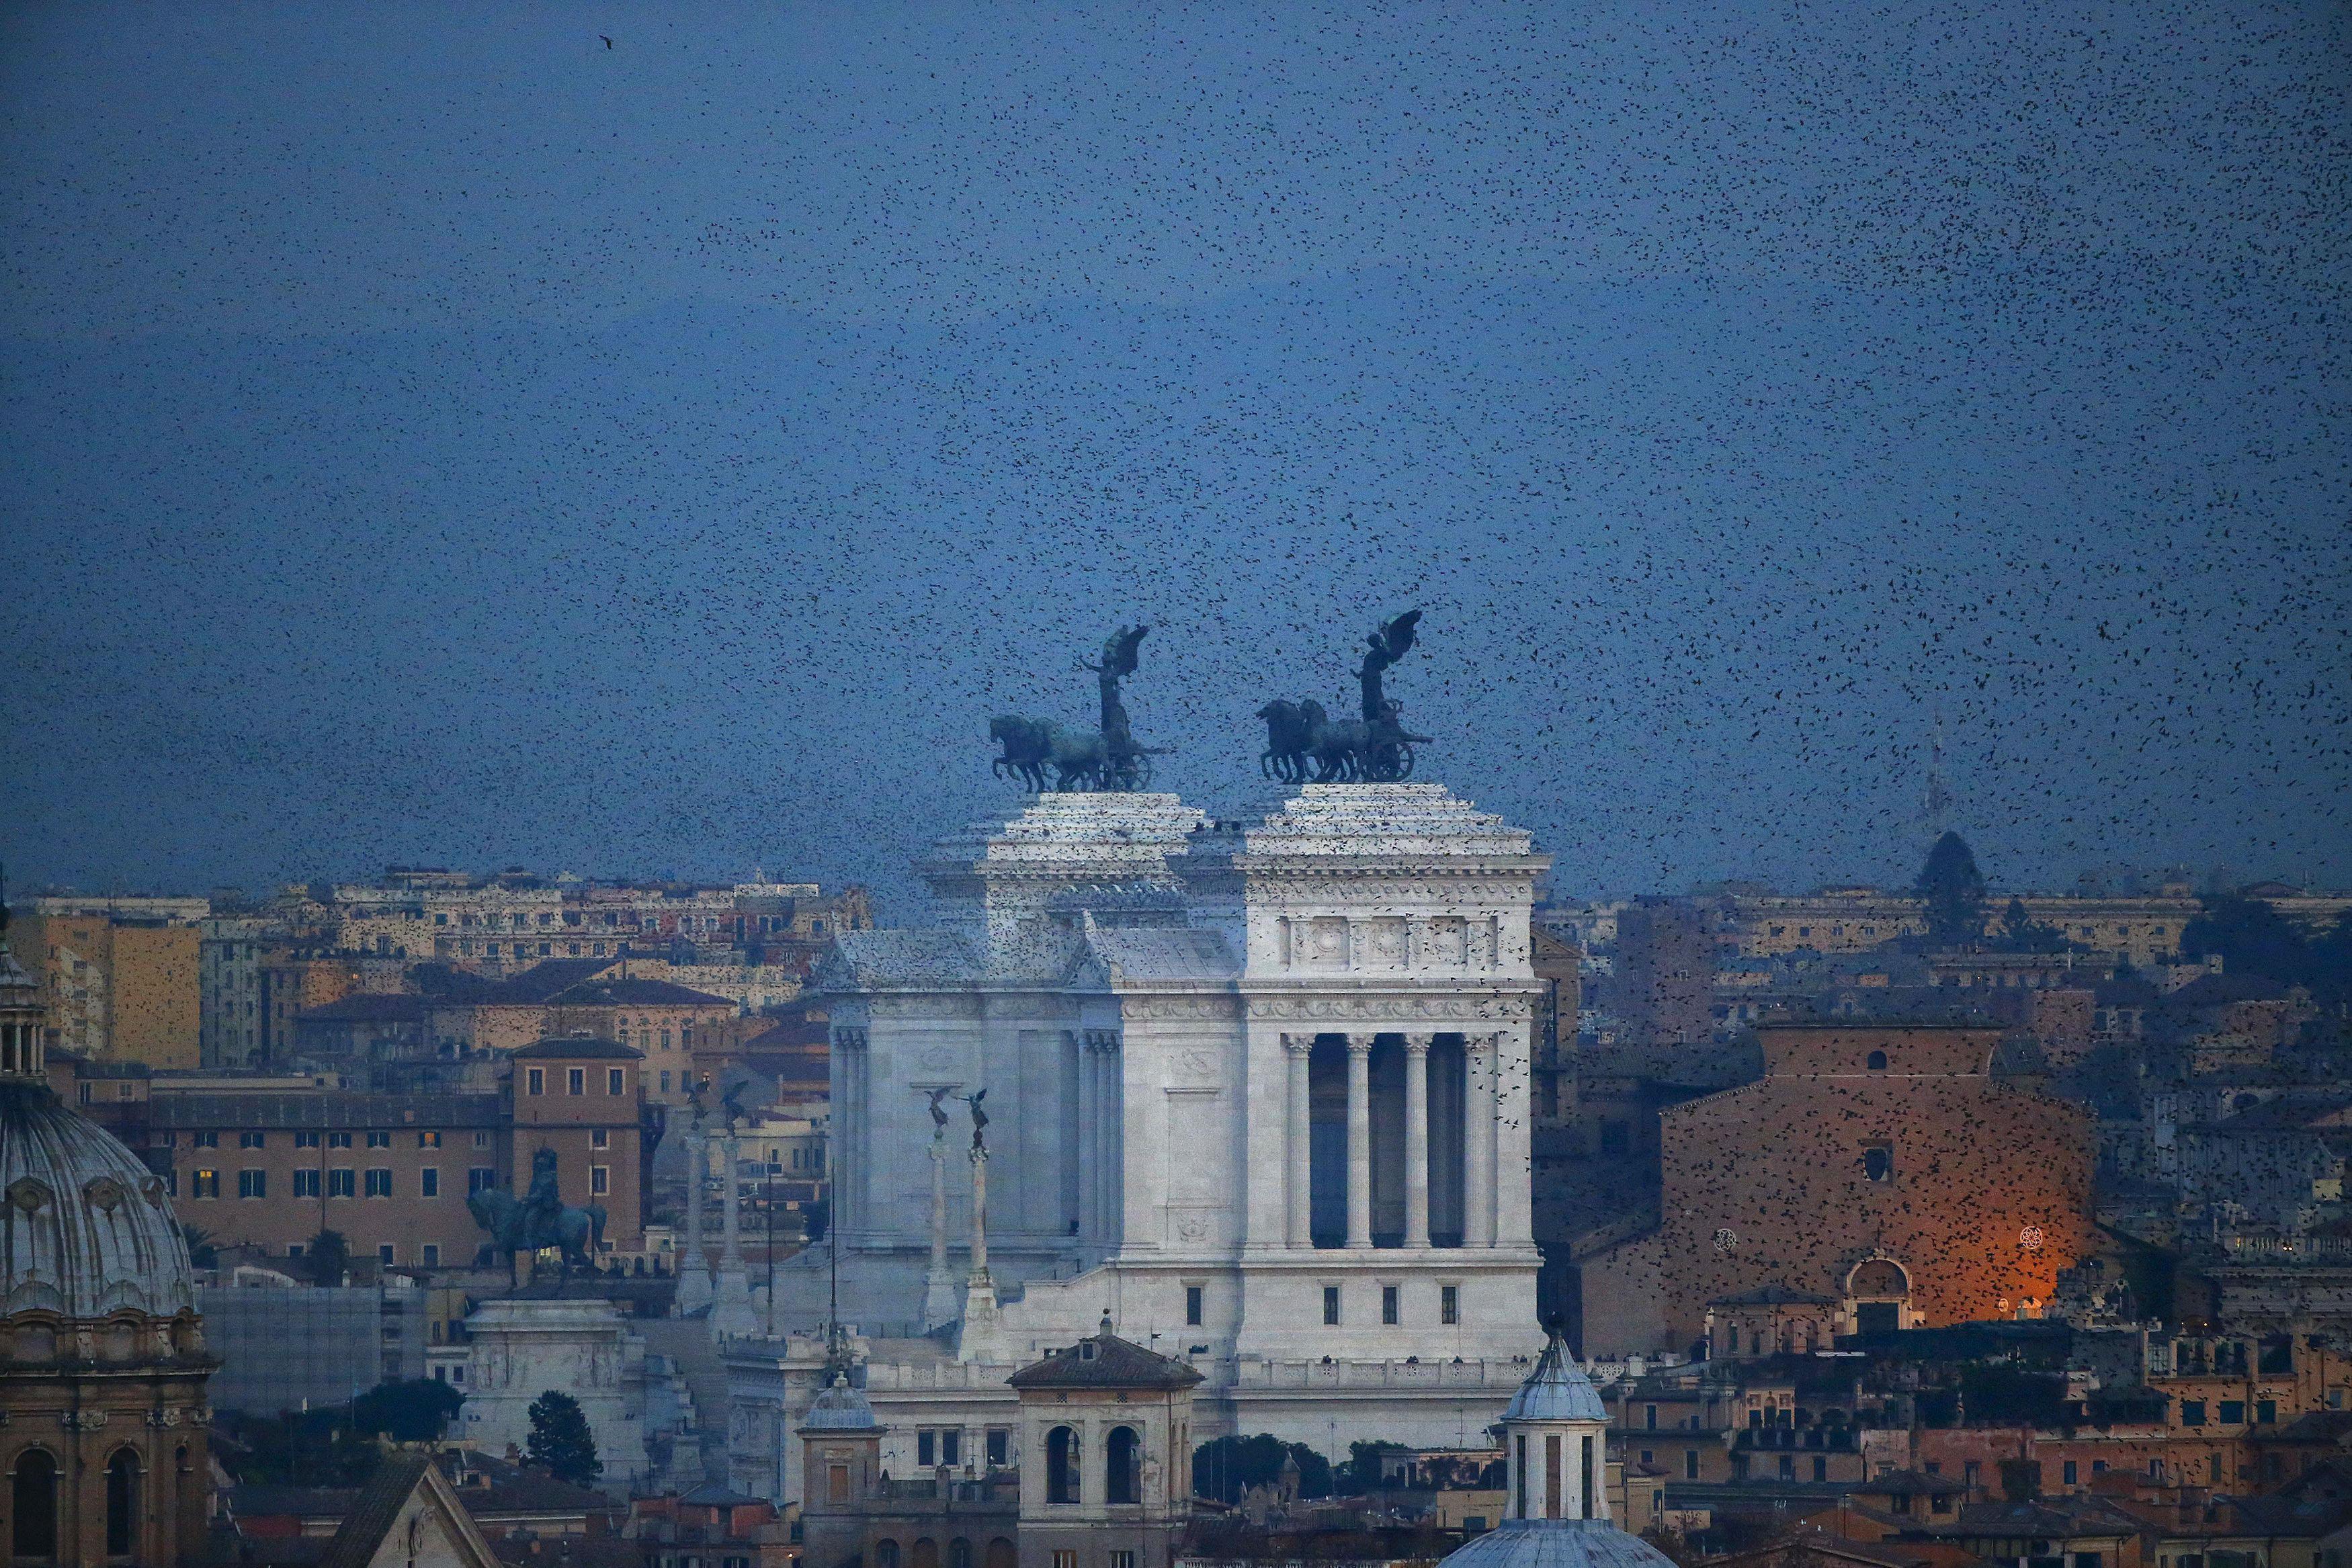 A flock of starlings flies in the dusk sky over Rome, Italy